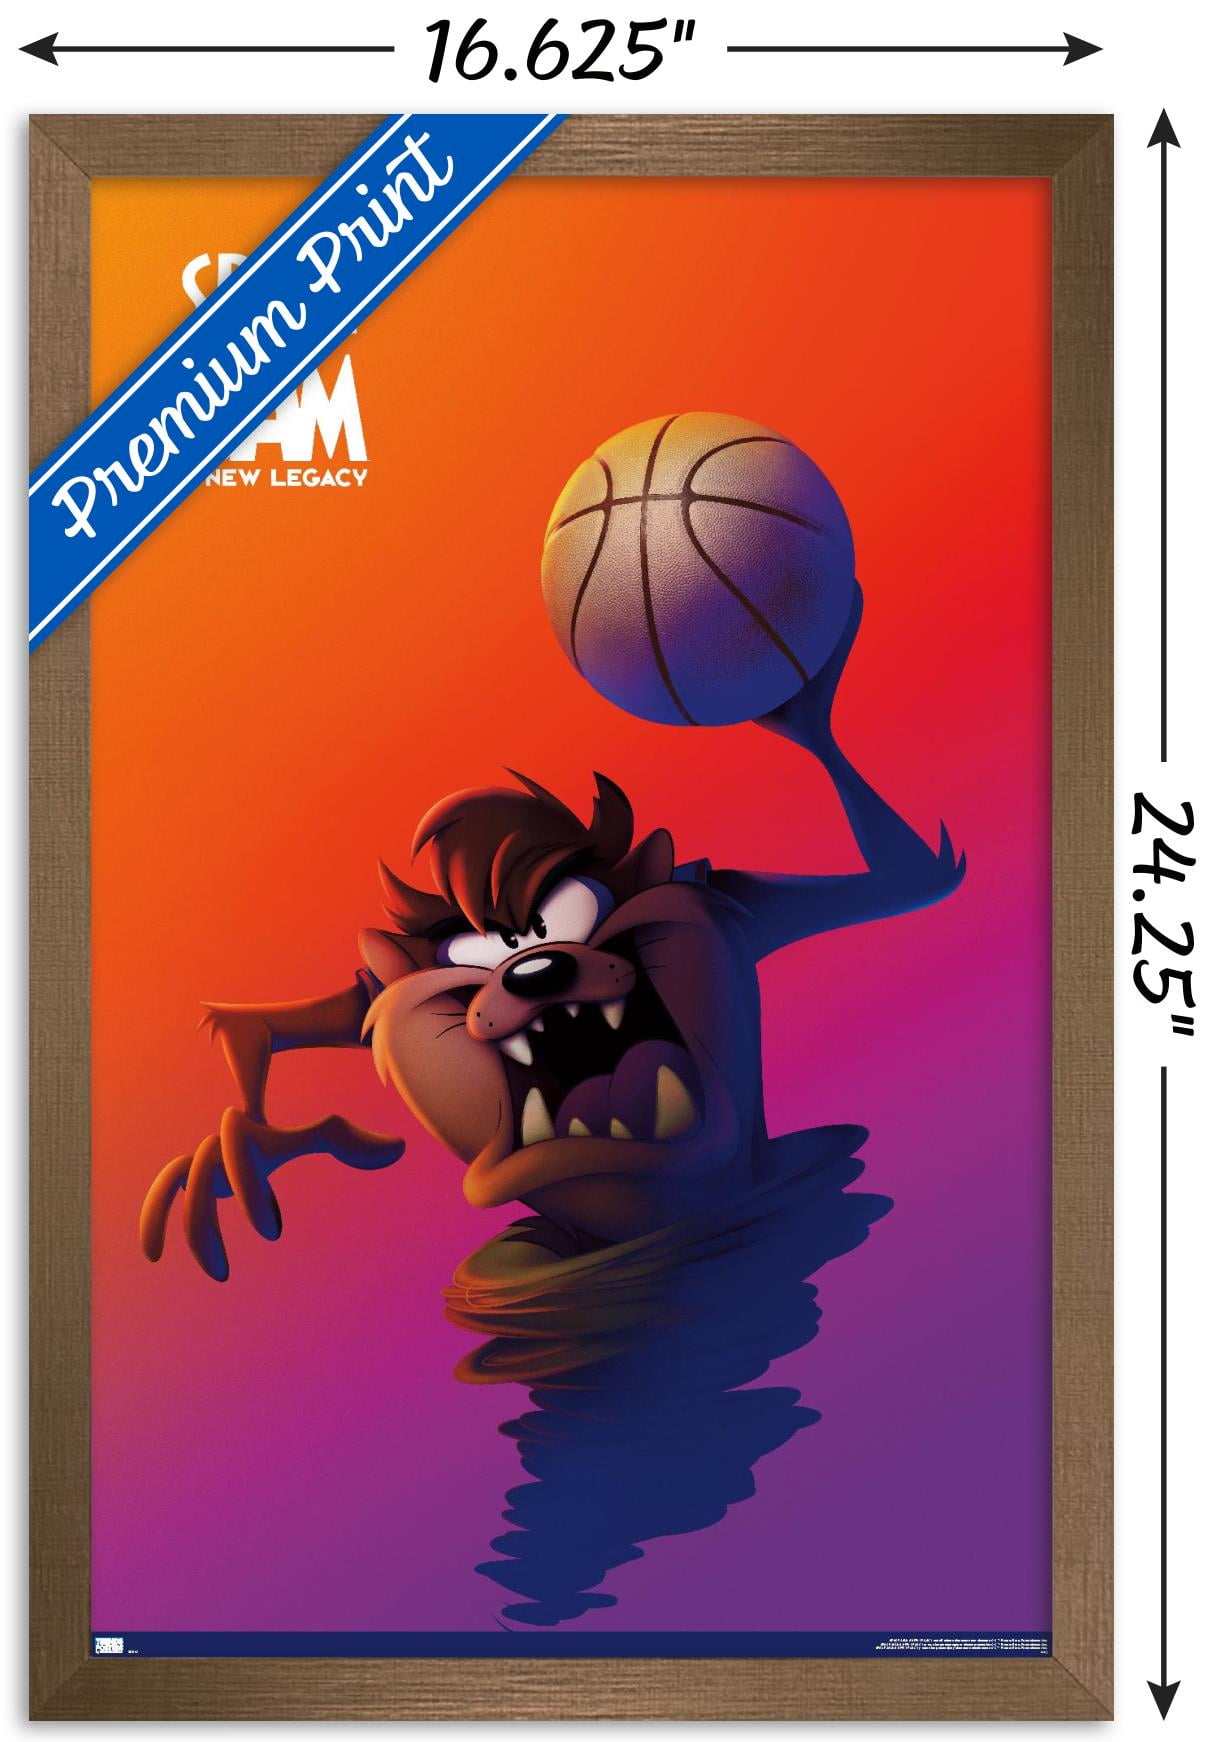 SPACE JAM: A NEW LEGACY, (aka SPACE JAM 2), US poster, top from left: Tasmanian  Devil, Tweety Bird, bottom from left: Lola Bunny, Bugs Bunny, LeBron James,  Sylvester, Speedy Gonzales, Daffy Duck